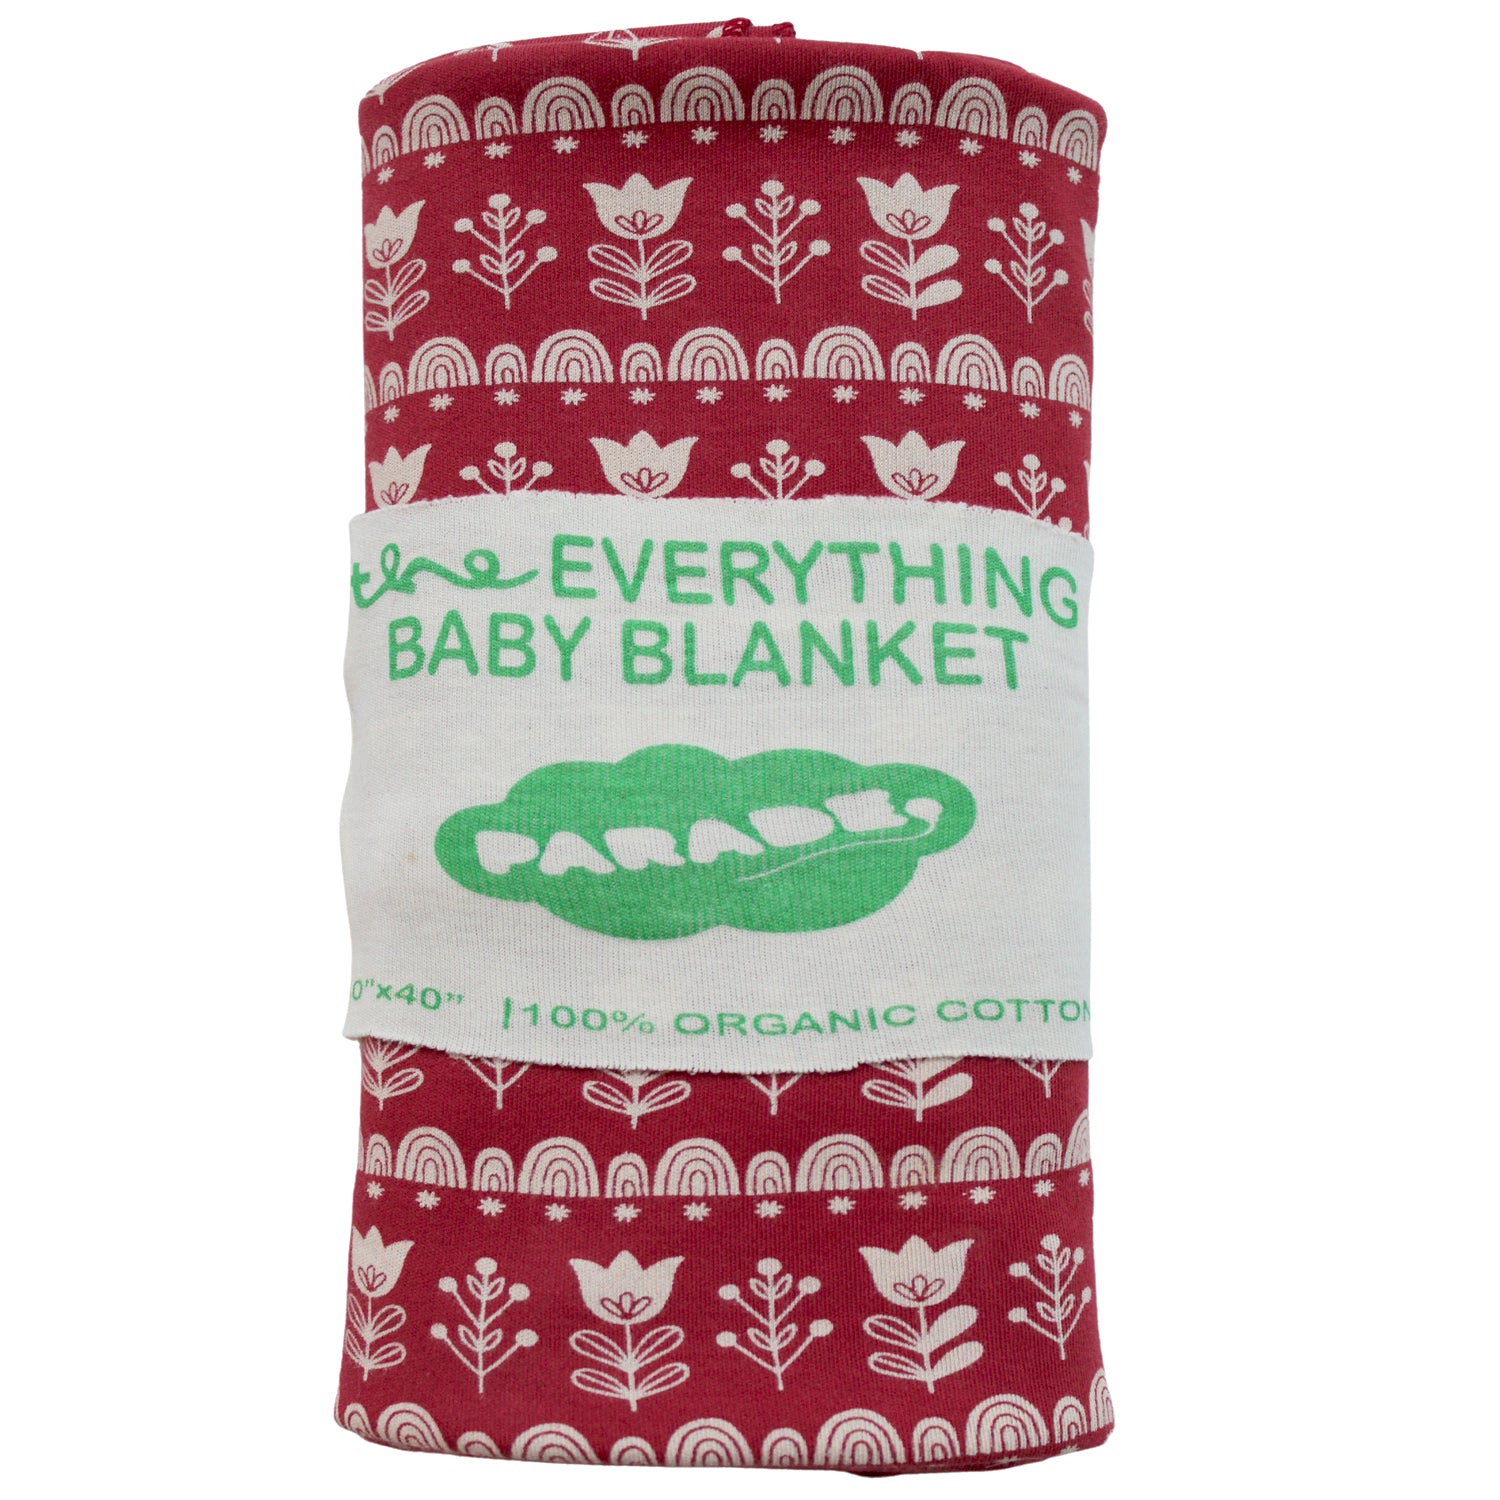 Thermal Swaddle Blanket Made with Organic Cotton